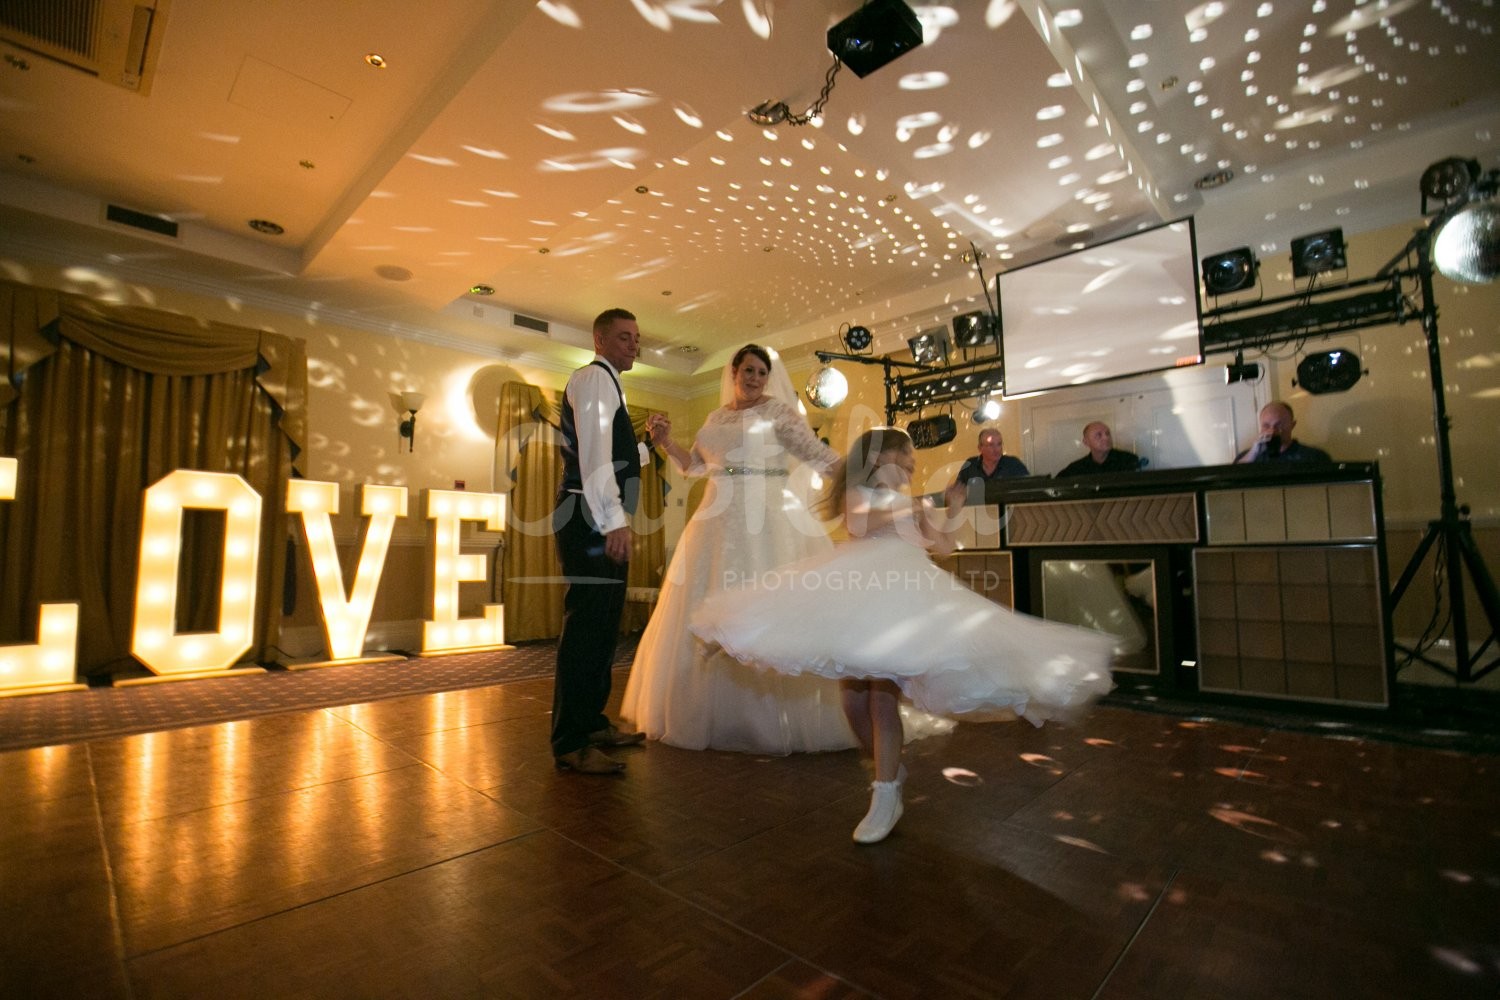 Its just as exciting as Christmas wedding disco, first dance, bridesmaid,LOVE Letters, yew lodge hotel